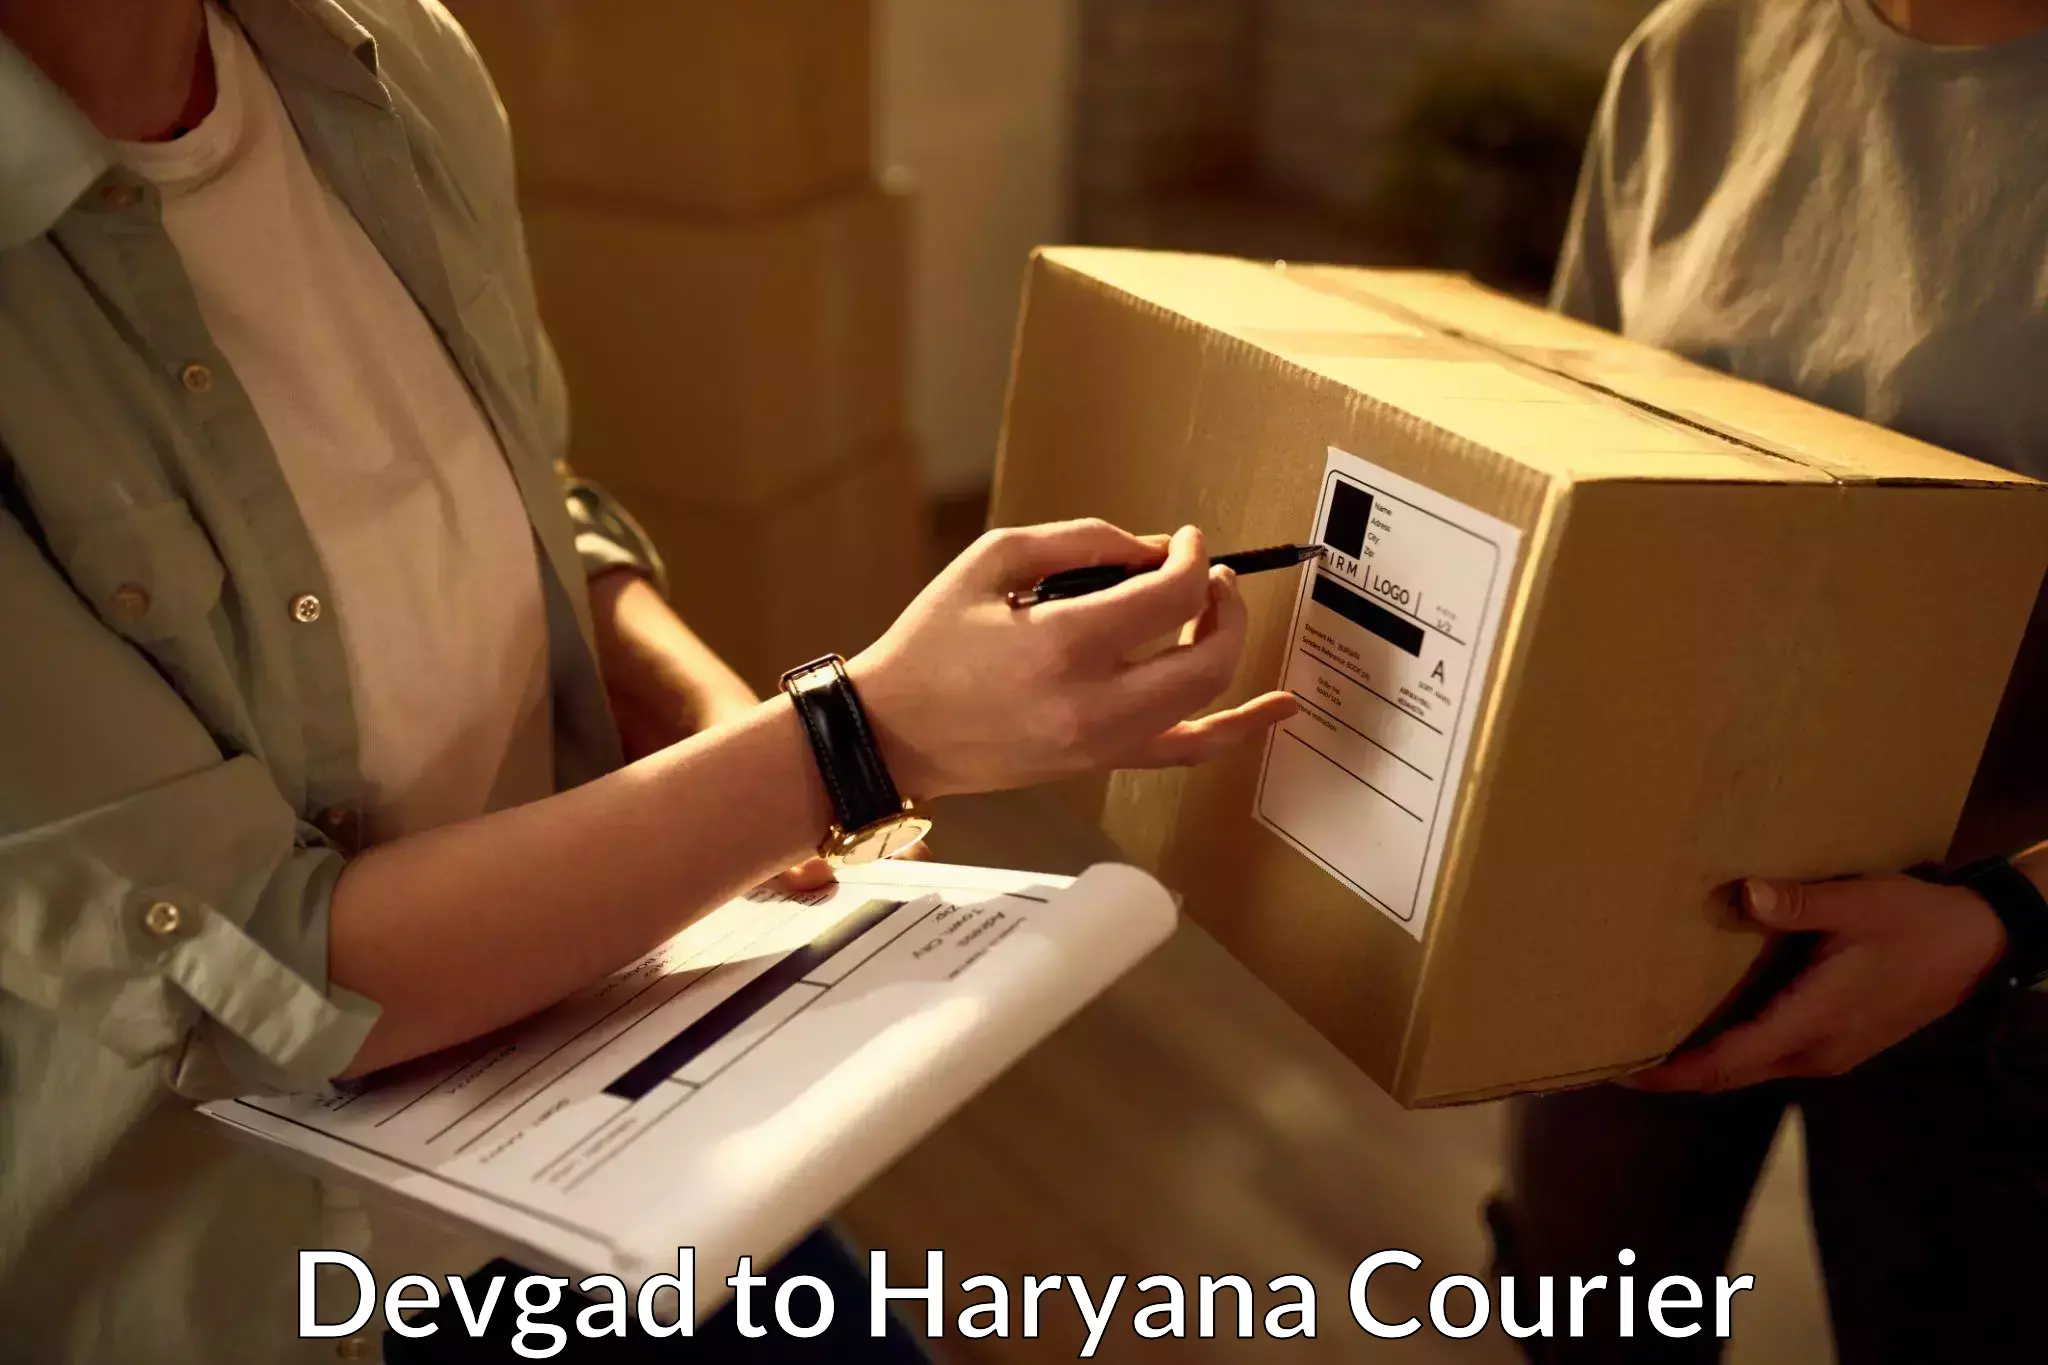 High-quality delivery services Devgad to Chaudhary Charan Singh Haryana Agricultural University Hisar